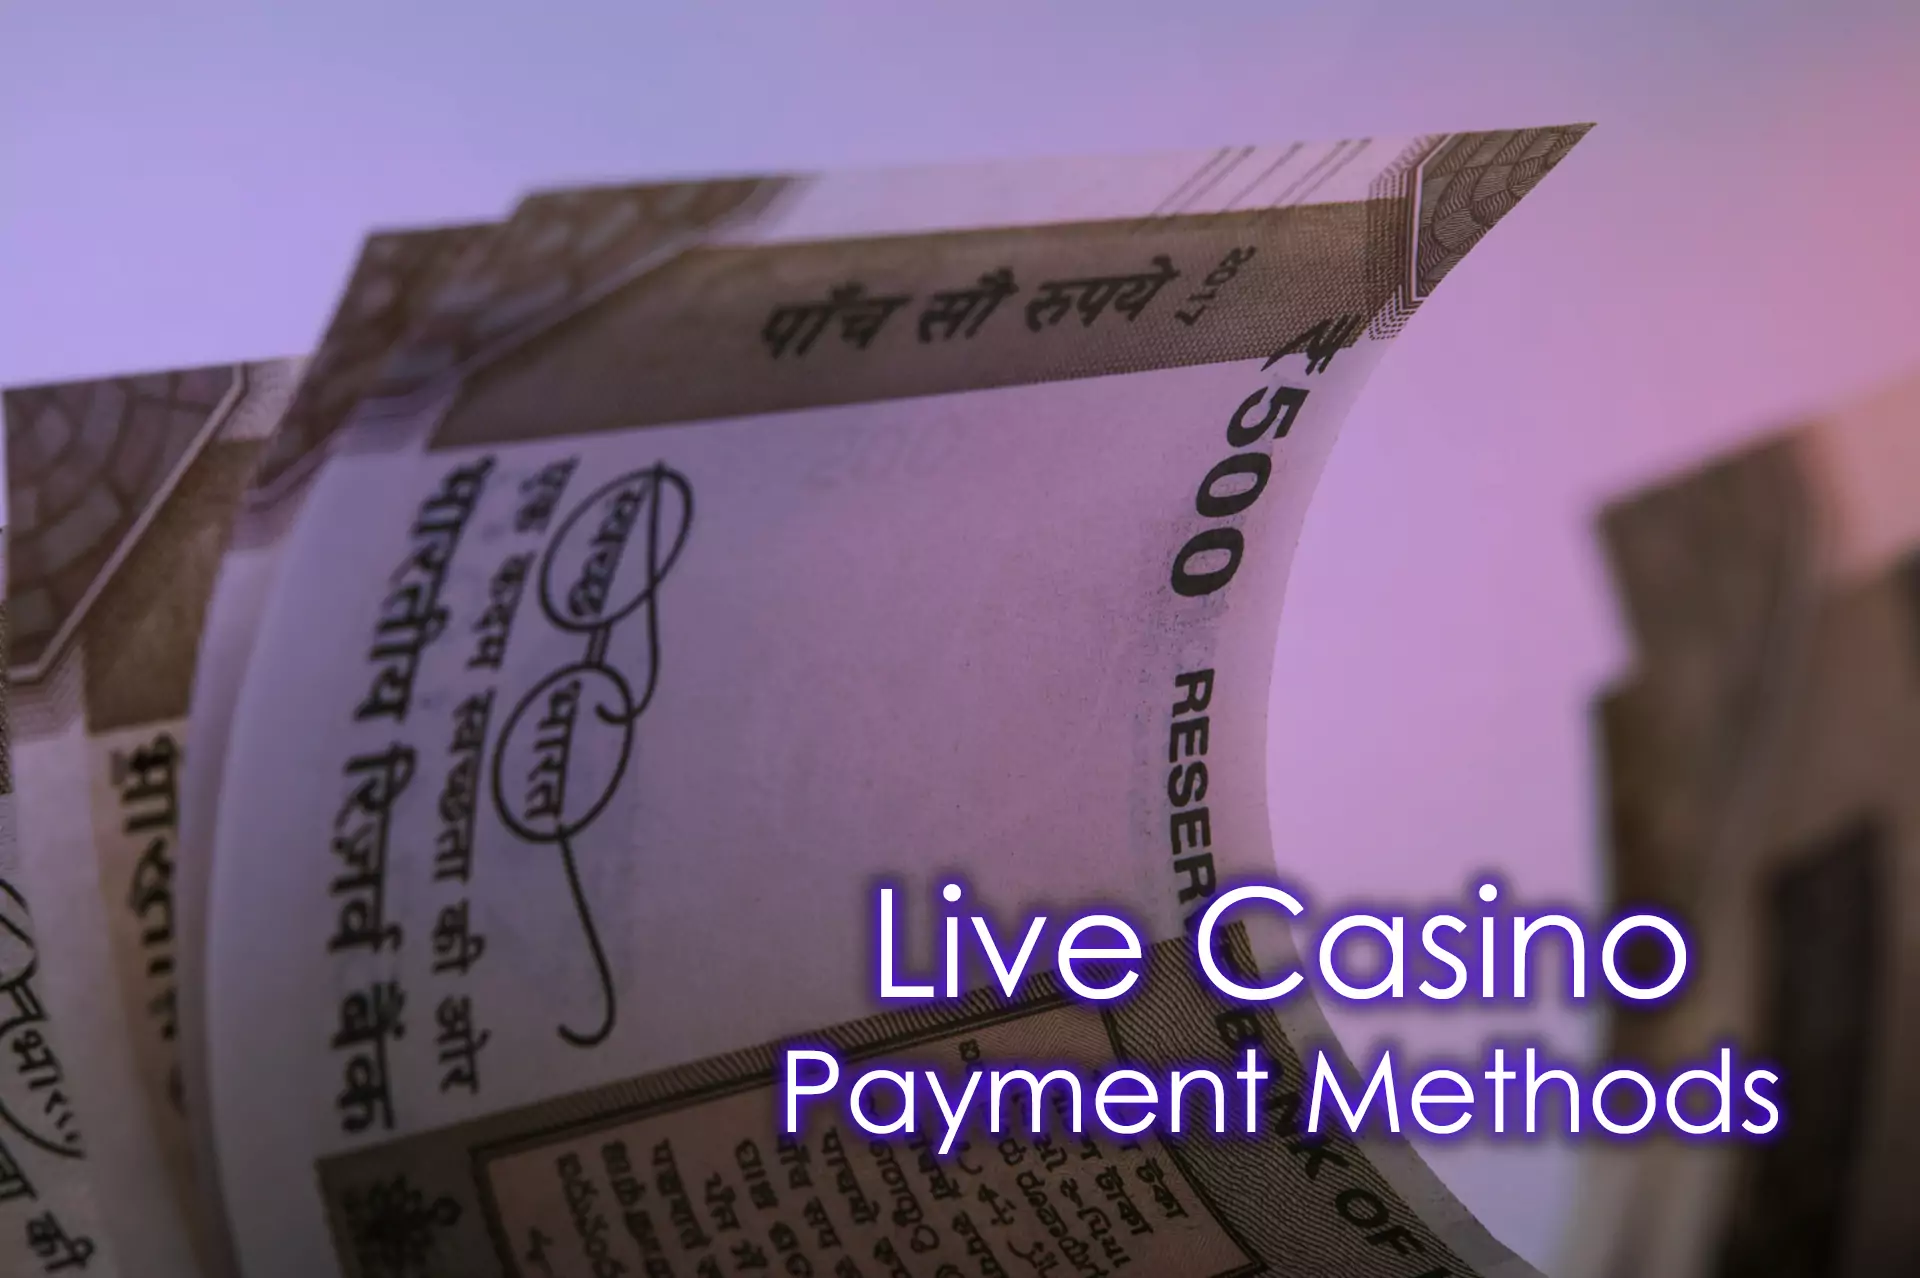 To play a live casino game, you need to top up your account with help of a bank card or e-wallet.